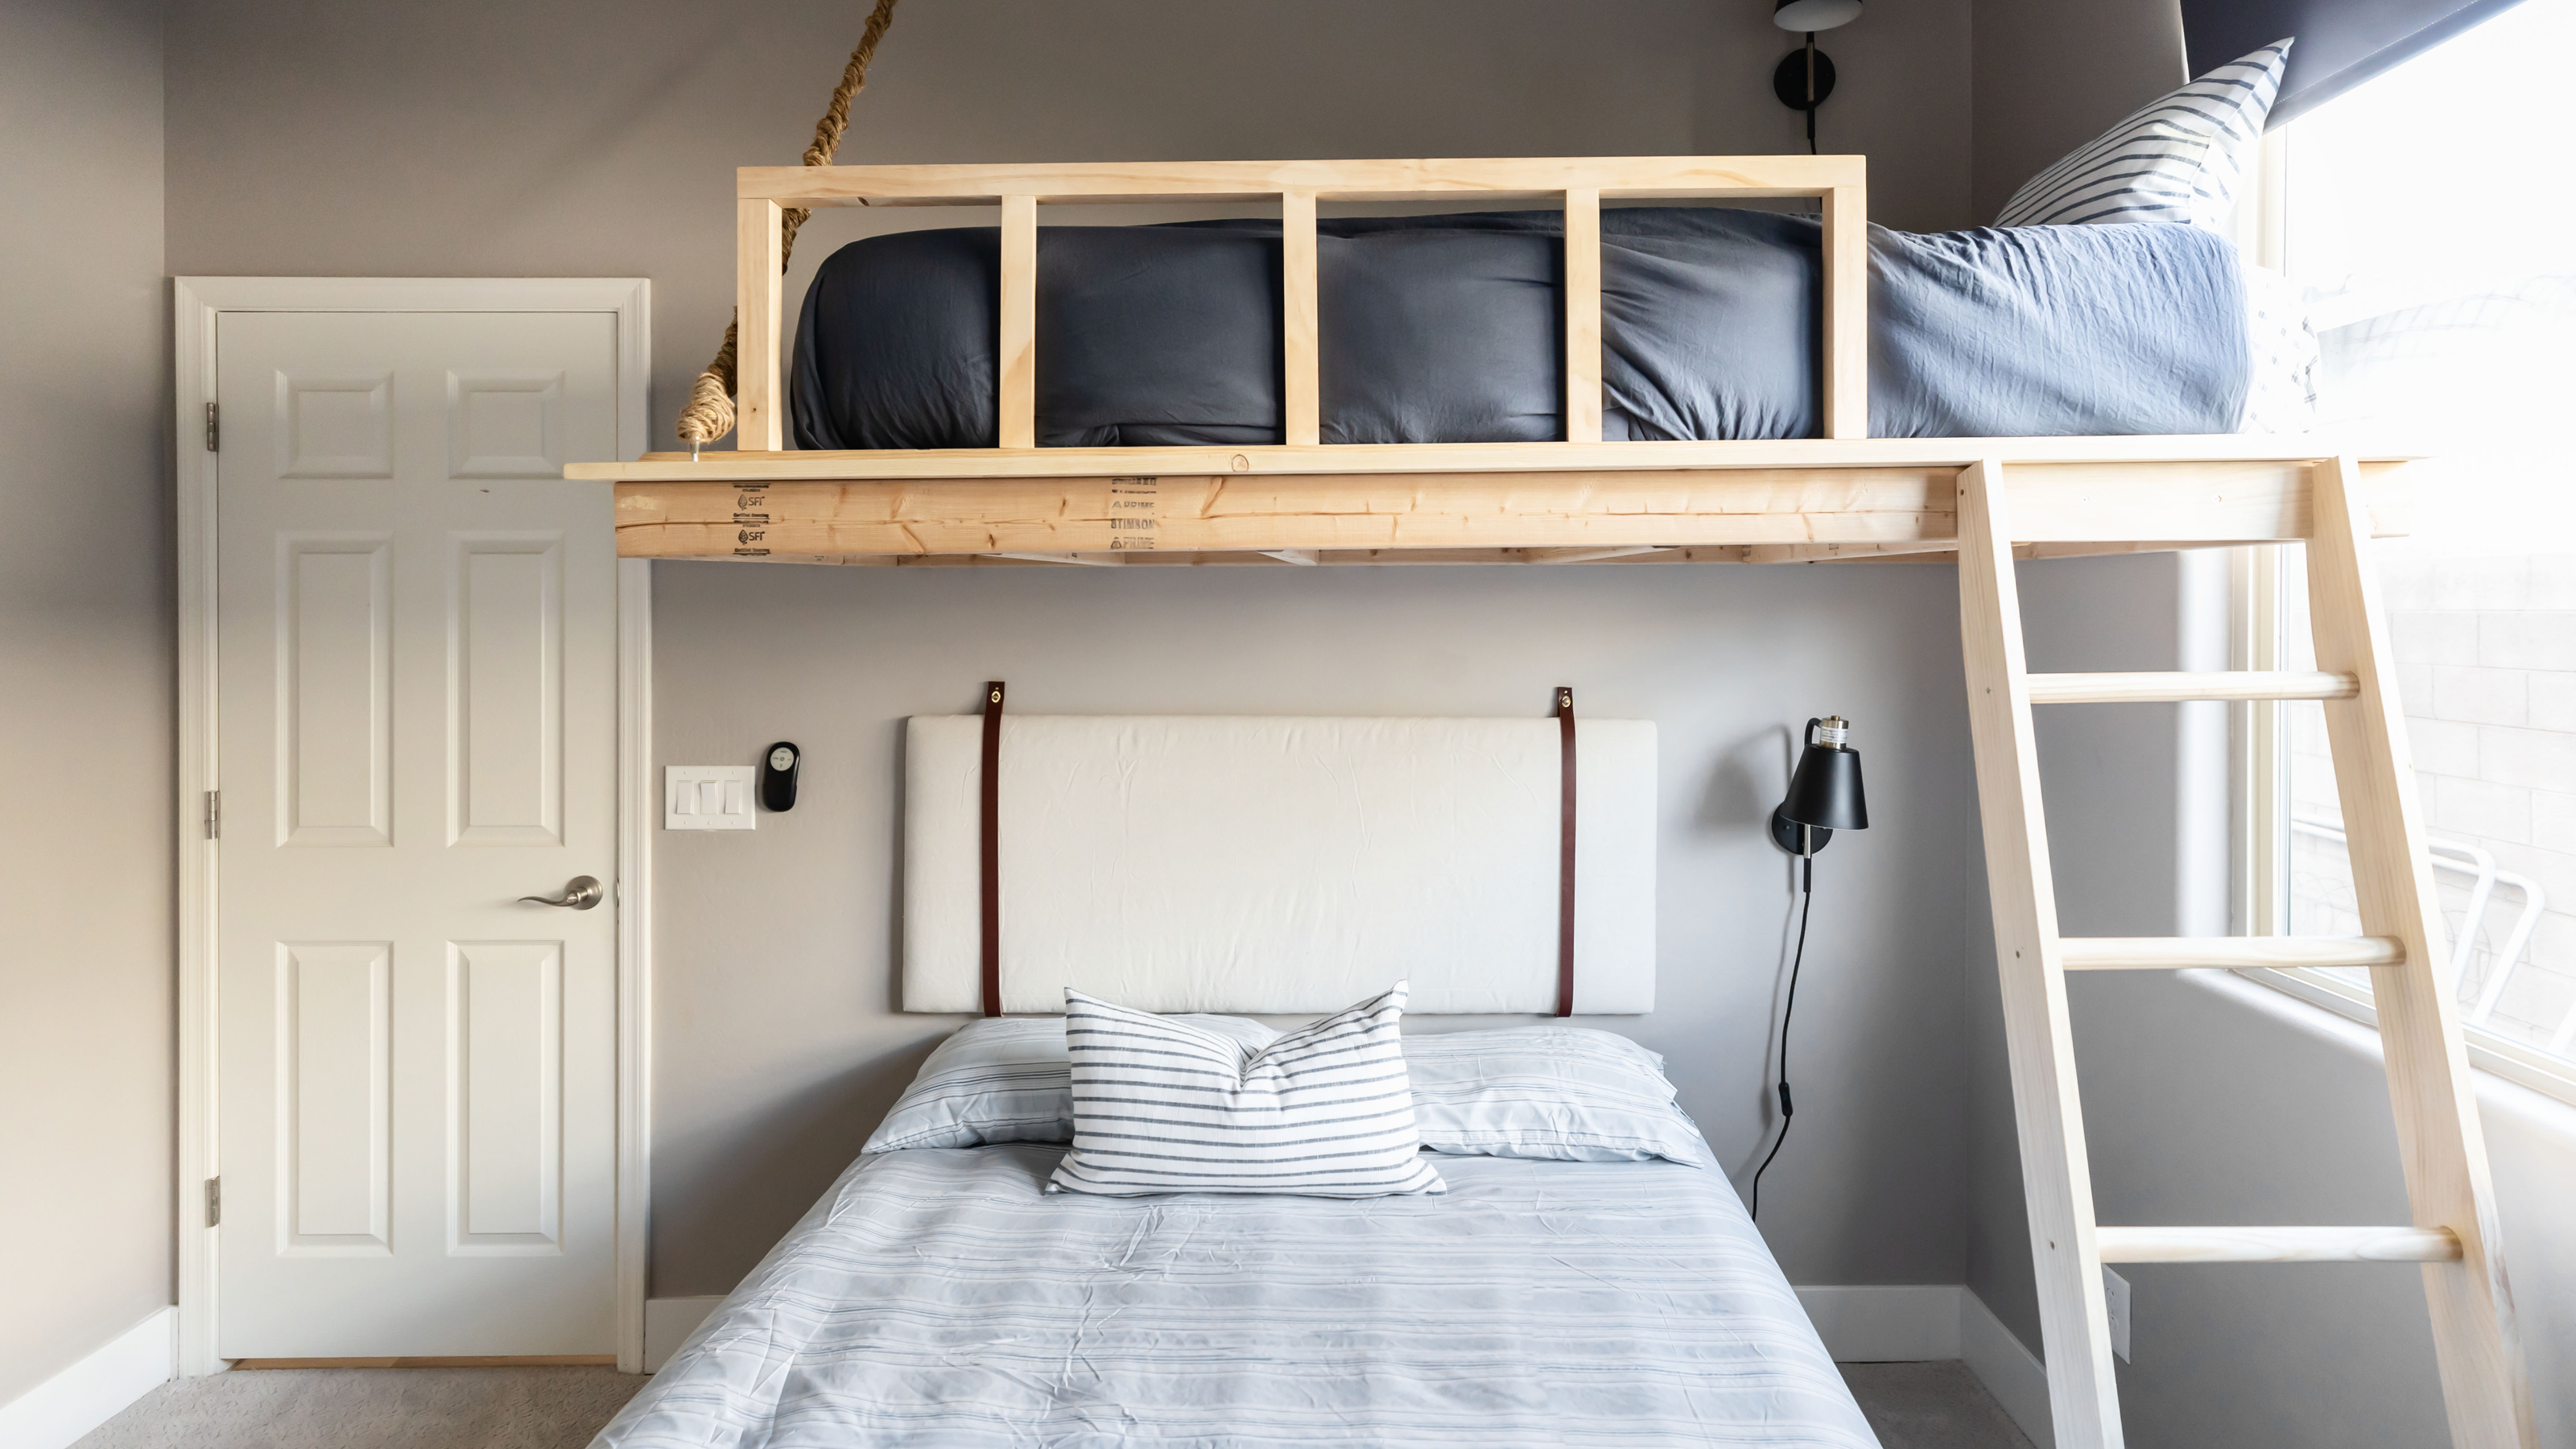 How To Build A Loft Bed Diy With This, How To Turn A Regular Bed Into Loft